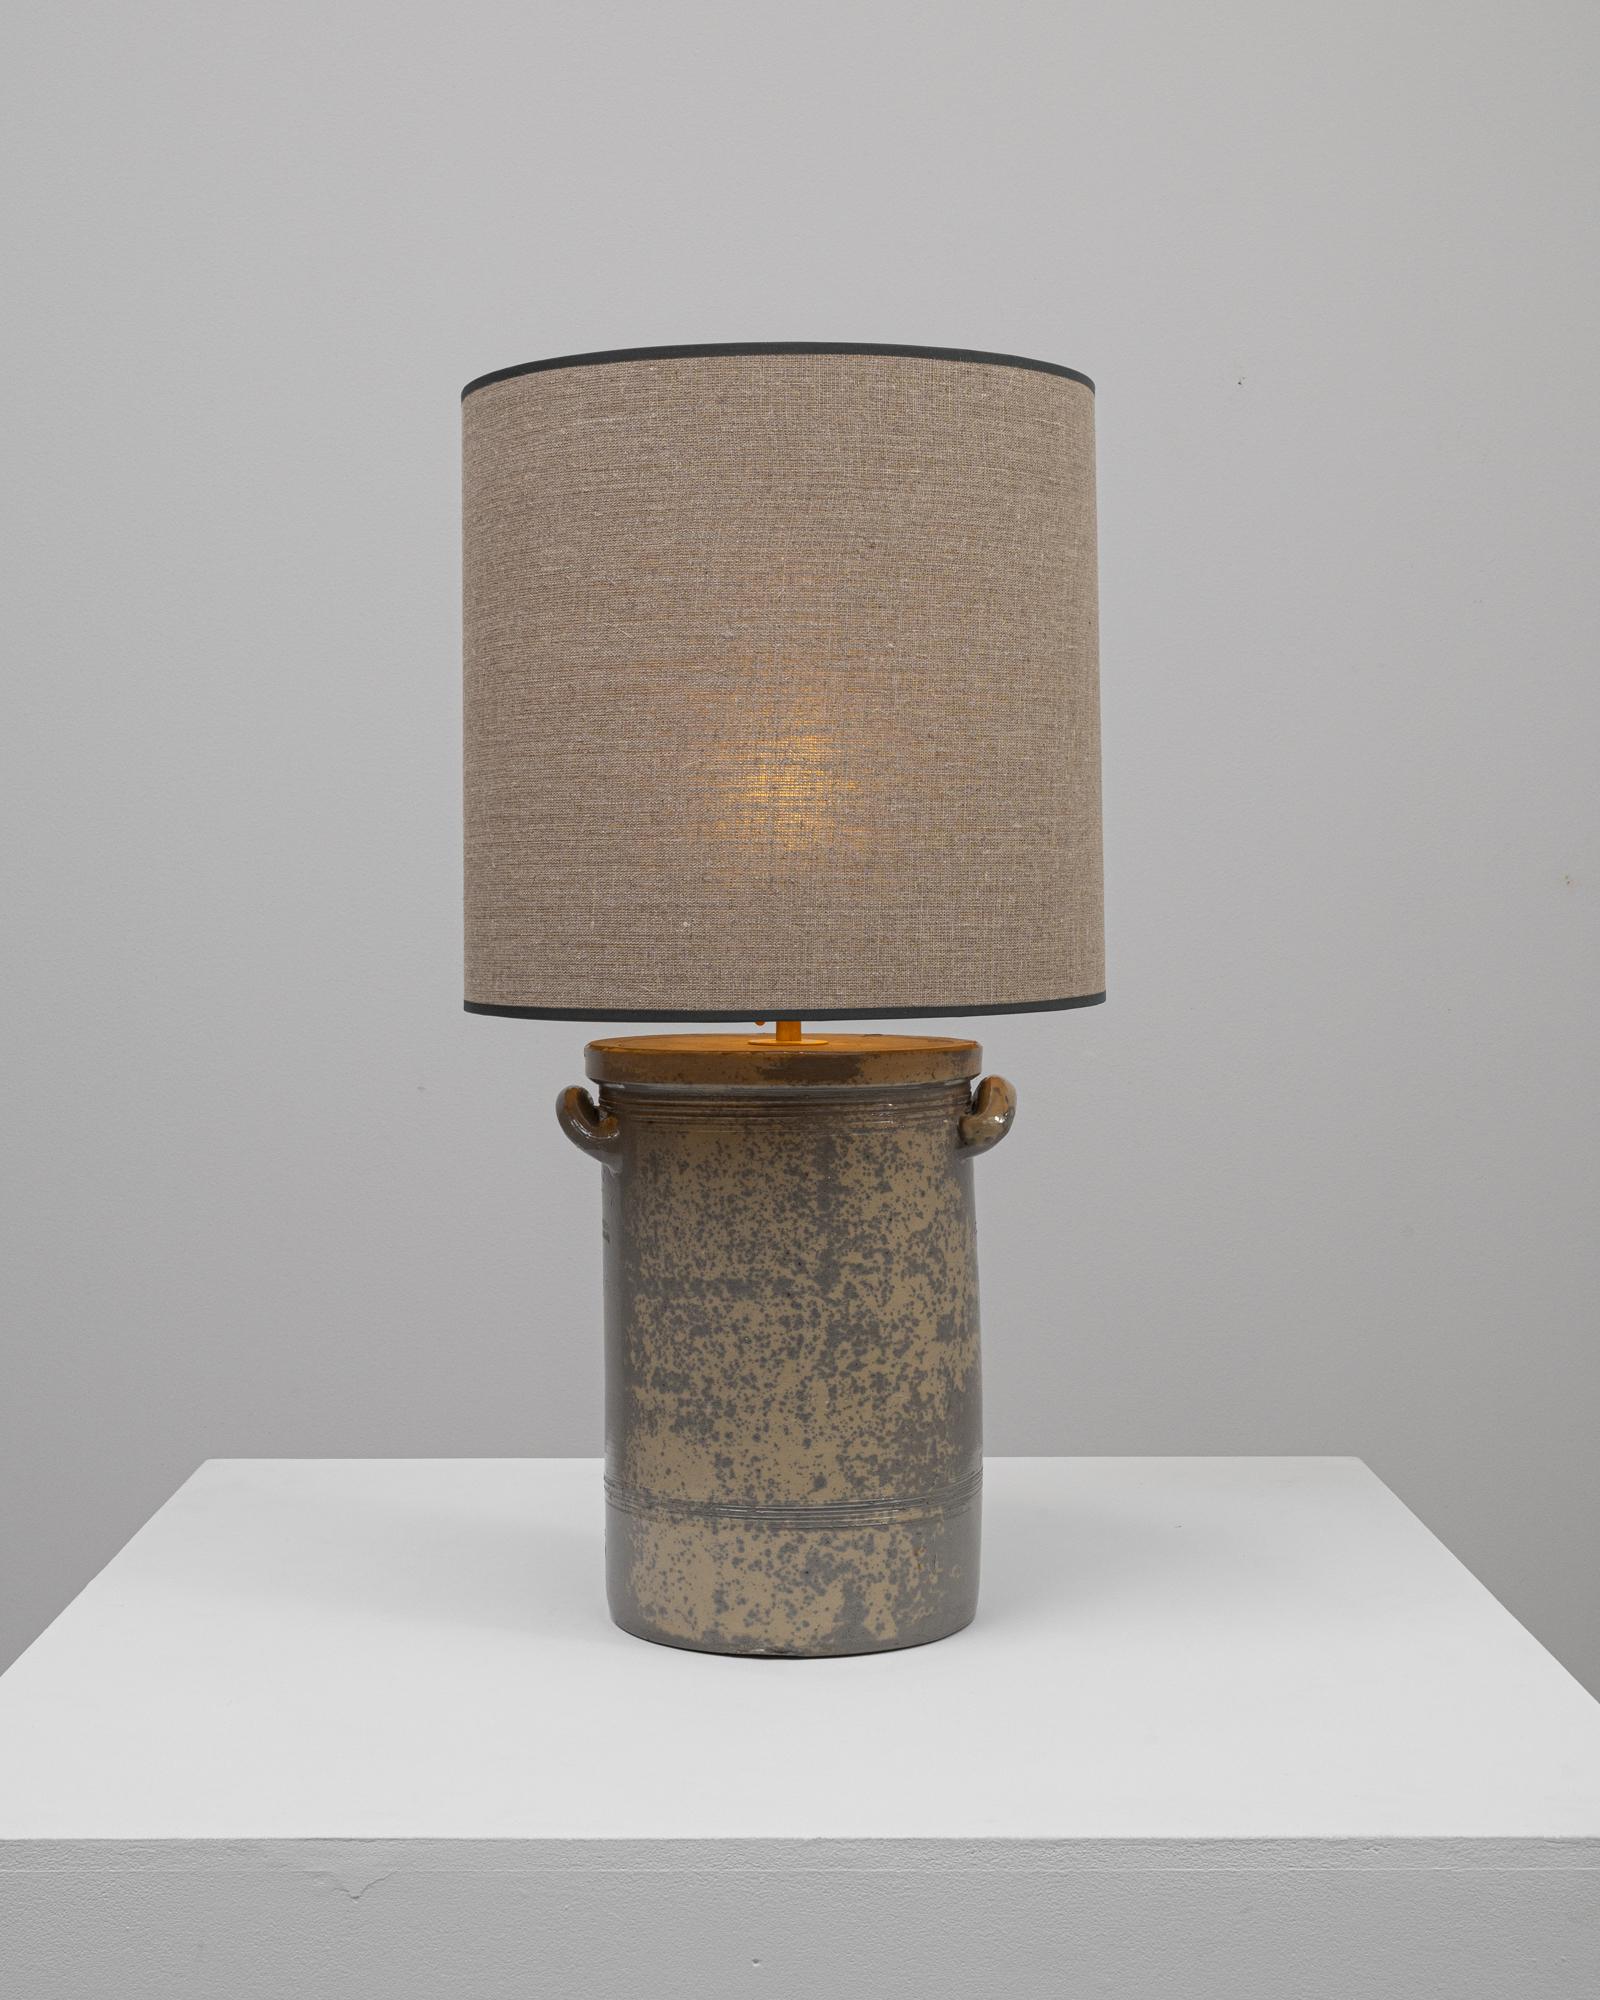 This 20th Century German Ceramic Table Lamp embodies the rugged, unrefined beauty of industrial design. The base, reminiscent of a milk pail, boasts a utilitarian form with an intriguing speckled finish that adds texture and visual interest. Its